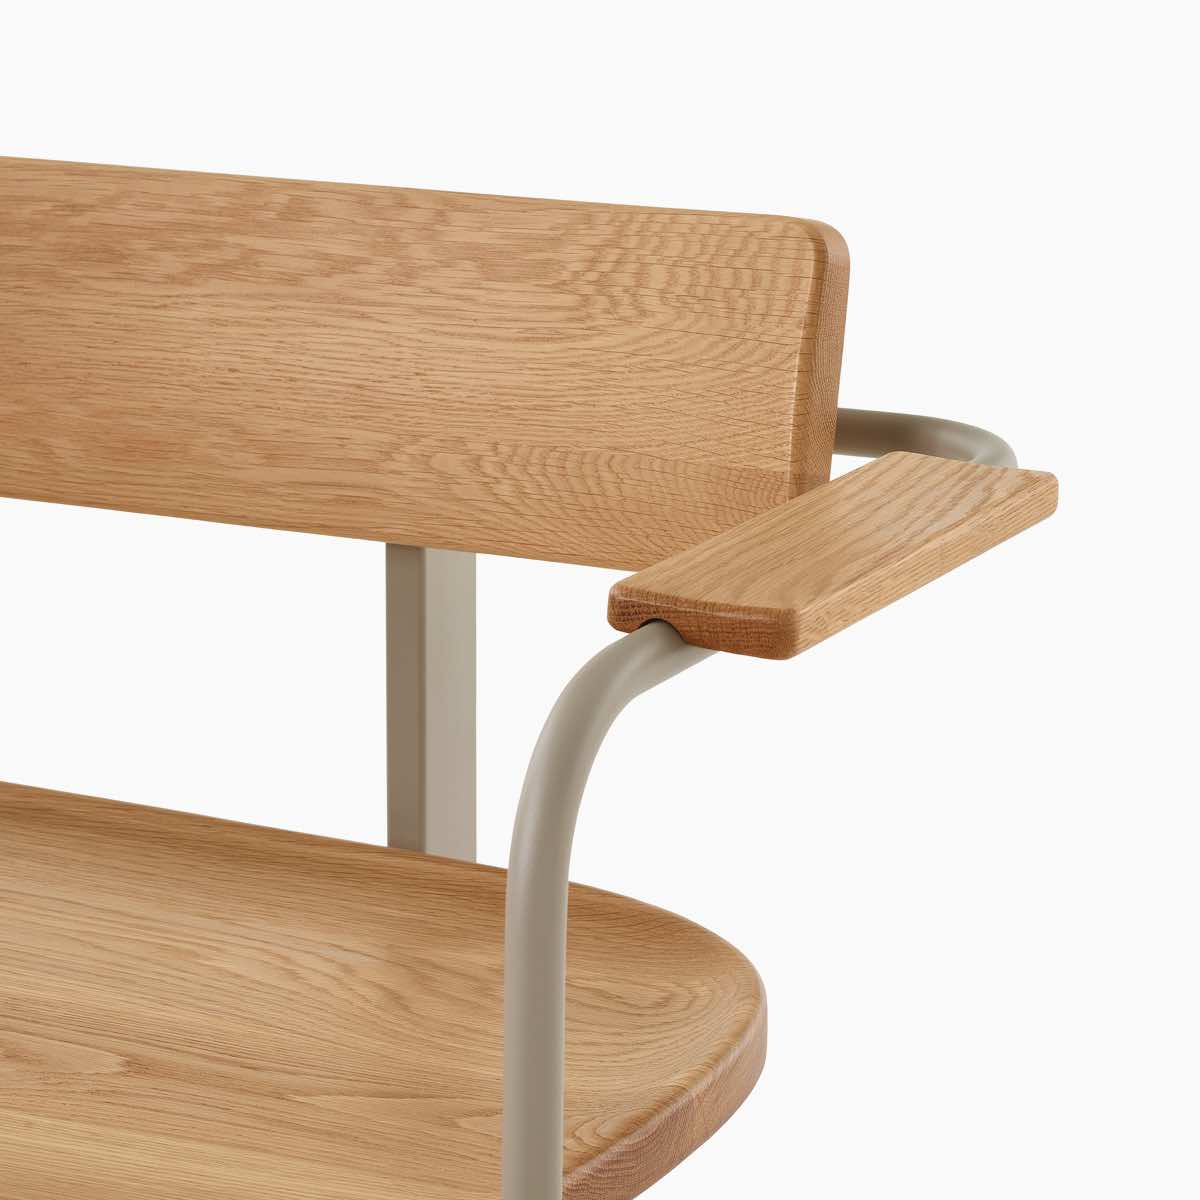 A close-up of a Betwixt Bench with oak seat, backrest and arms, with a grey frame.